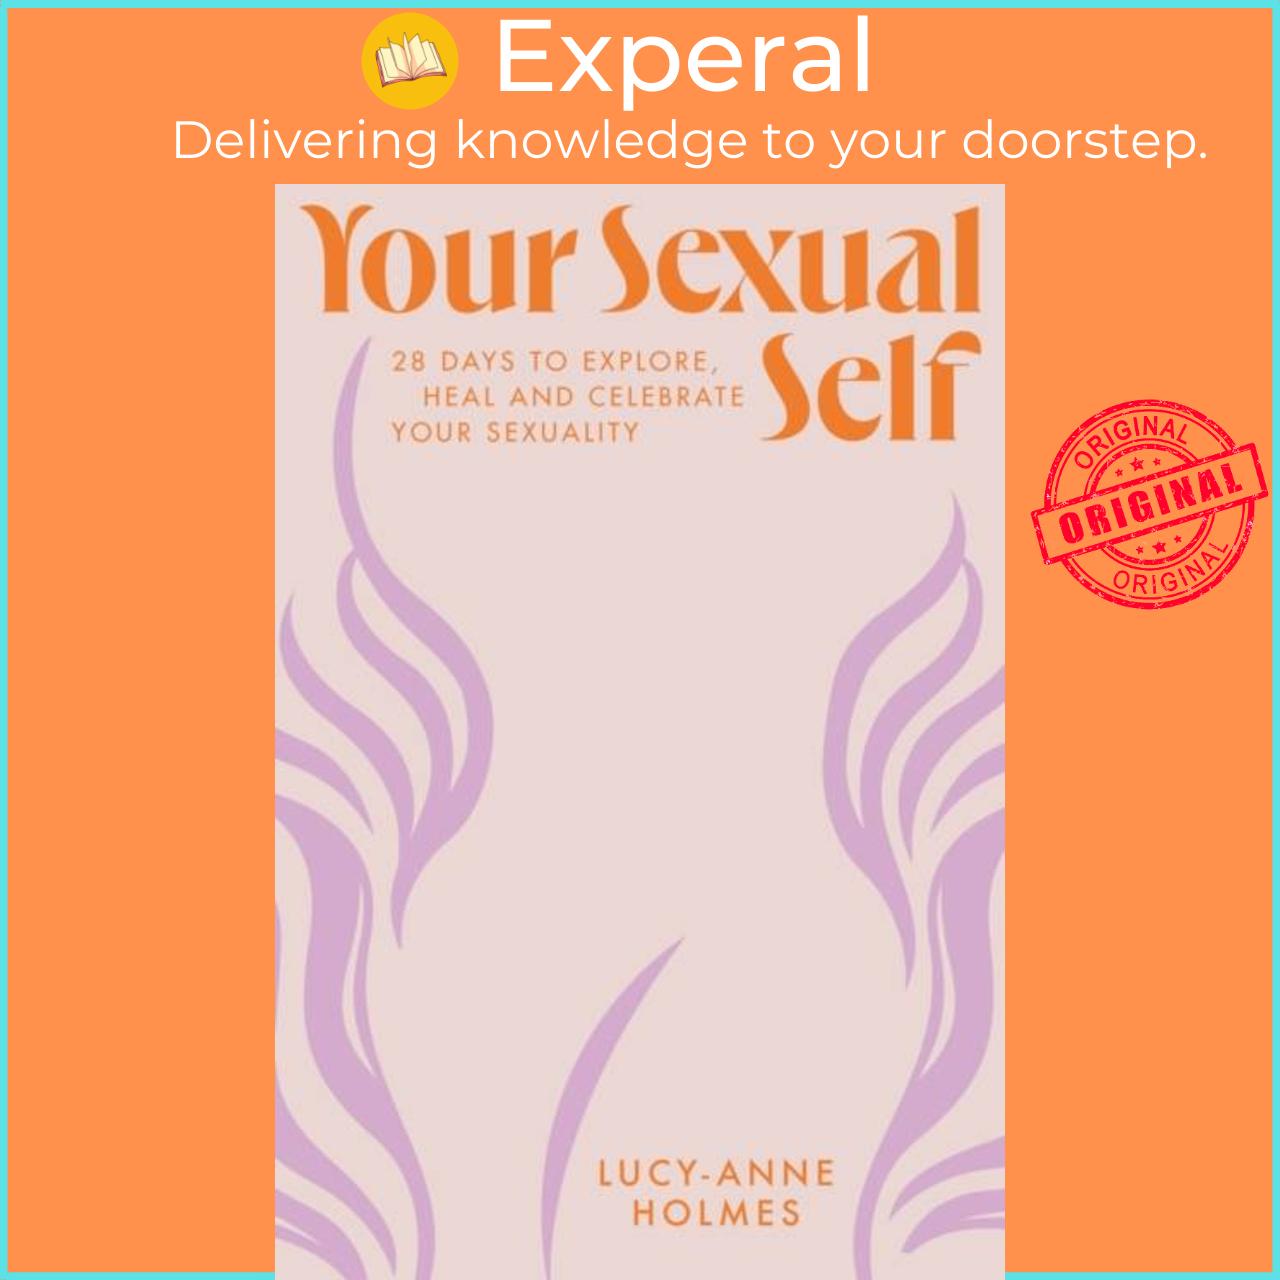 Sách - Your Sexual Self by Lucy-Anne Holmes (UK edition, hardcover)